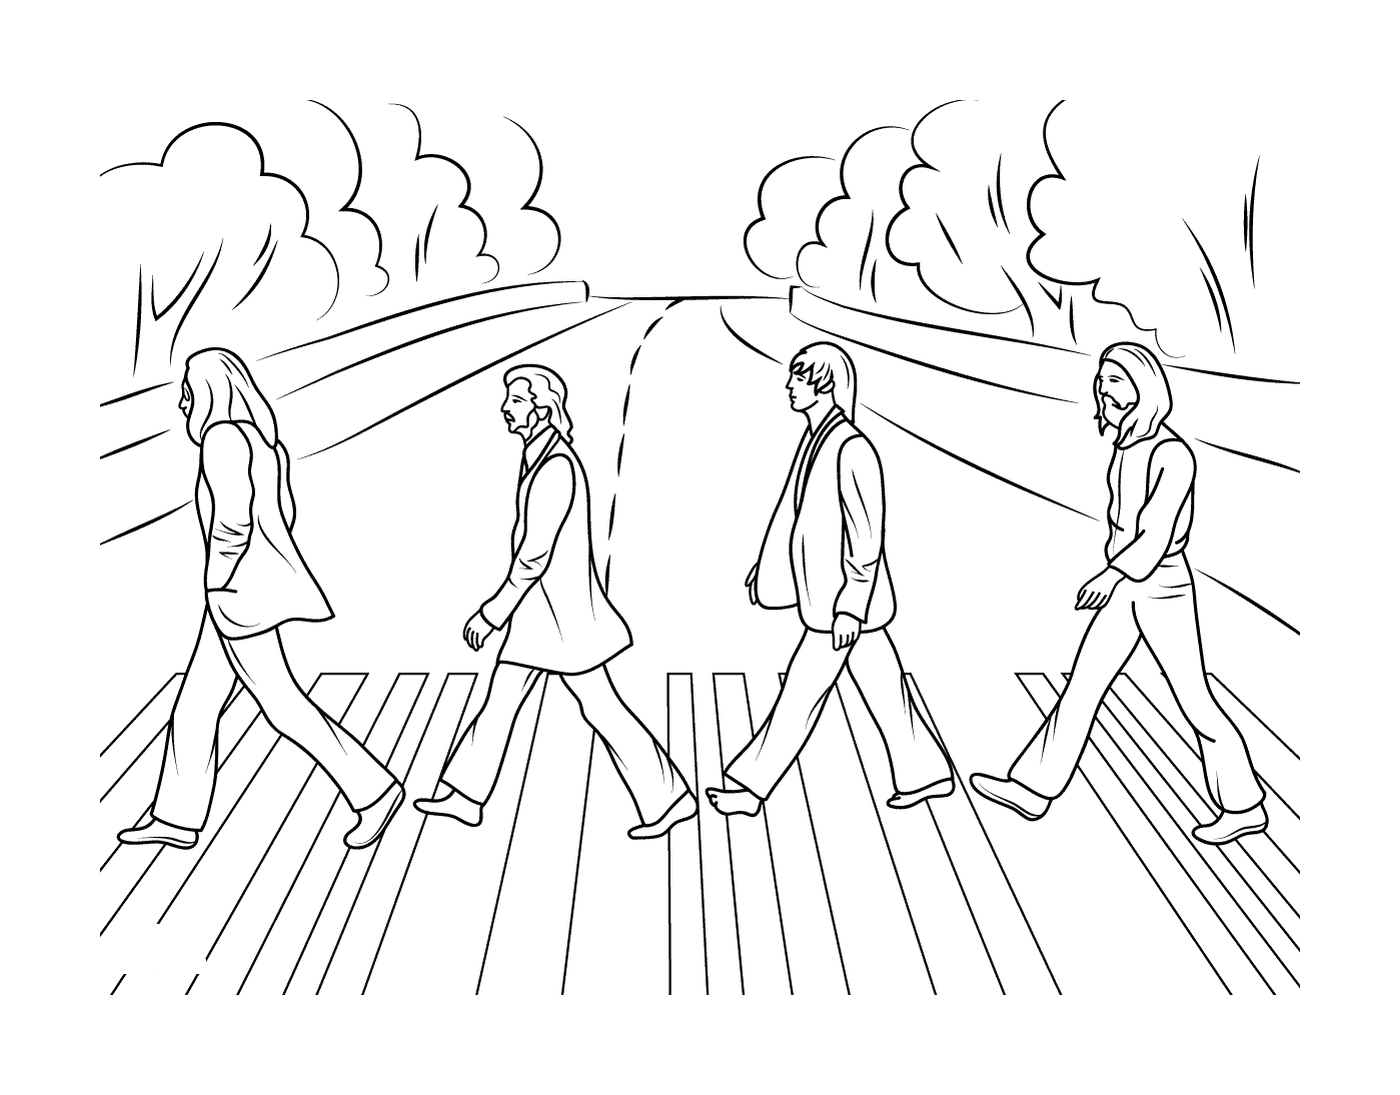  A group of people crossing a street 